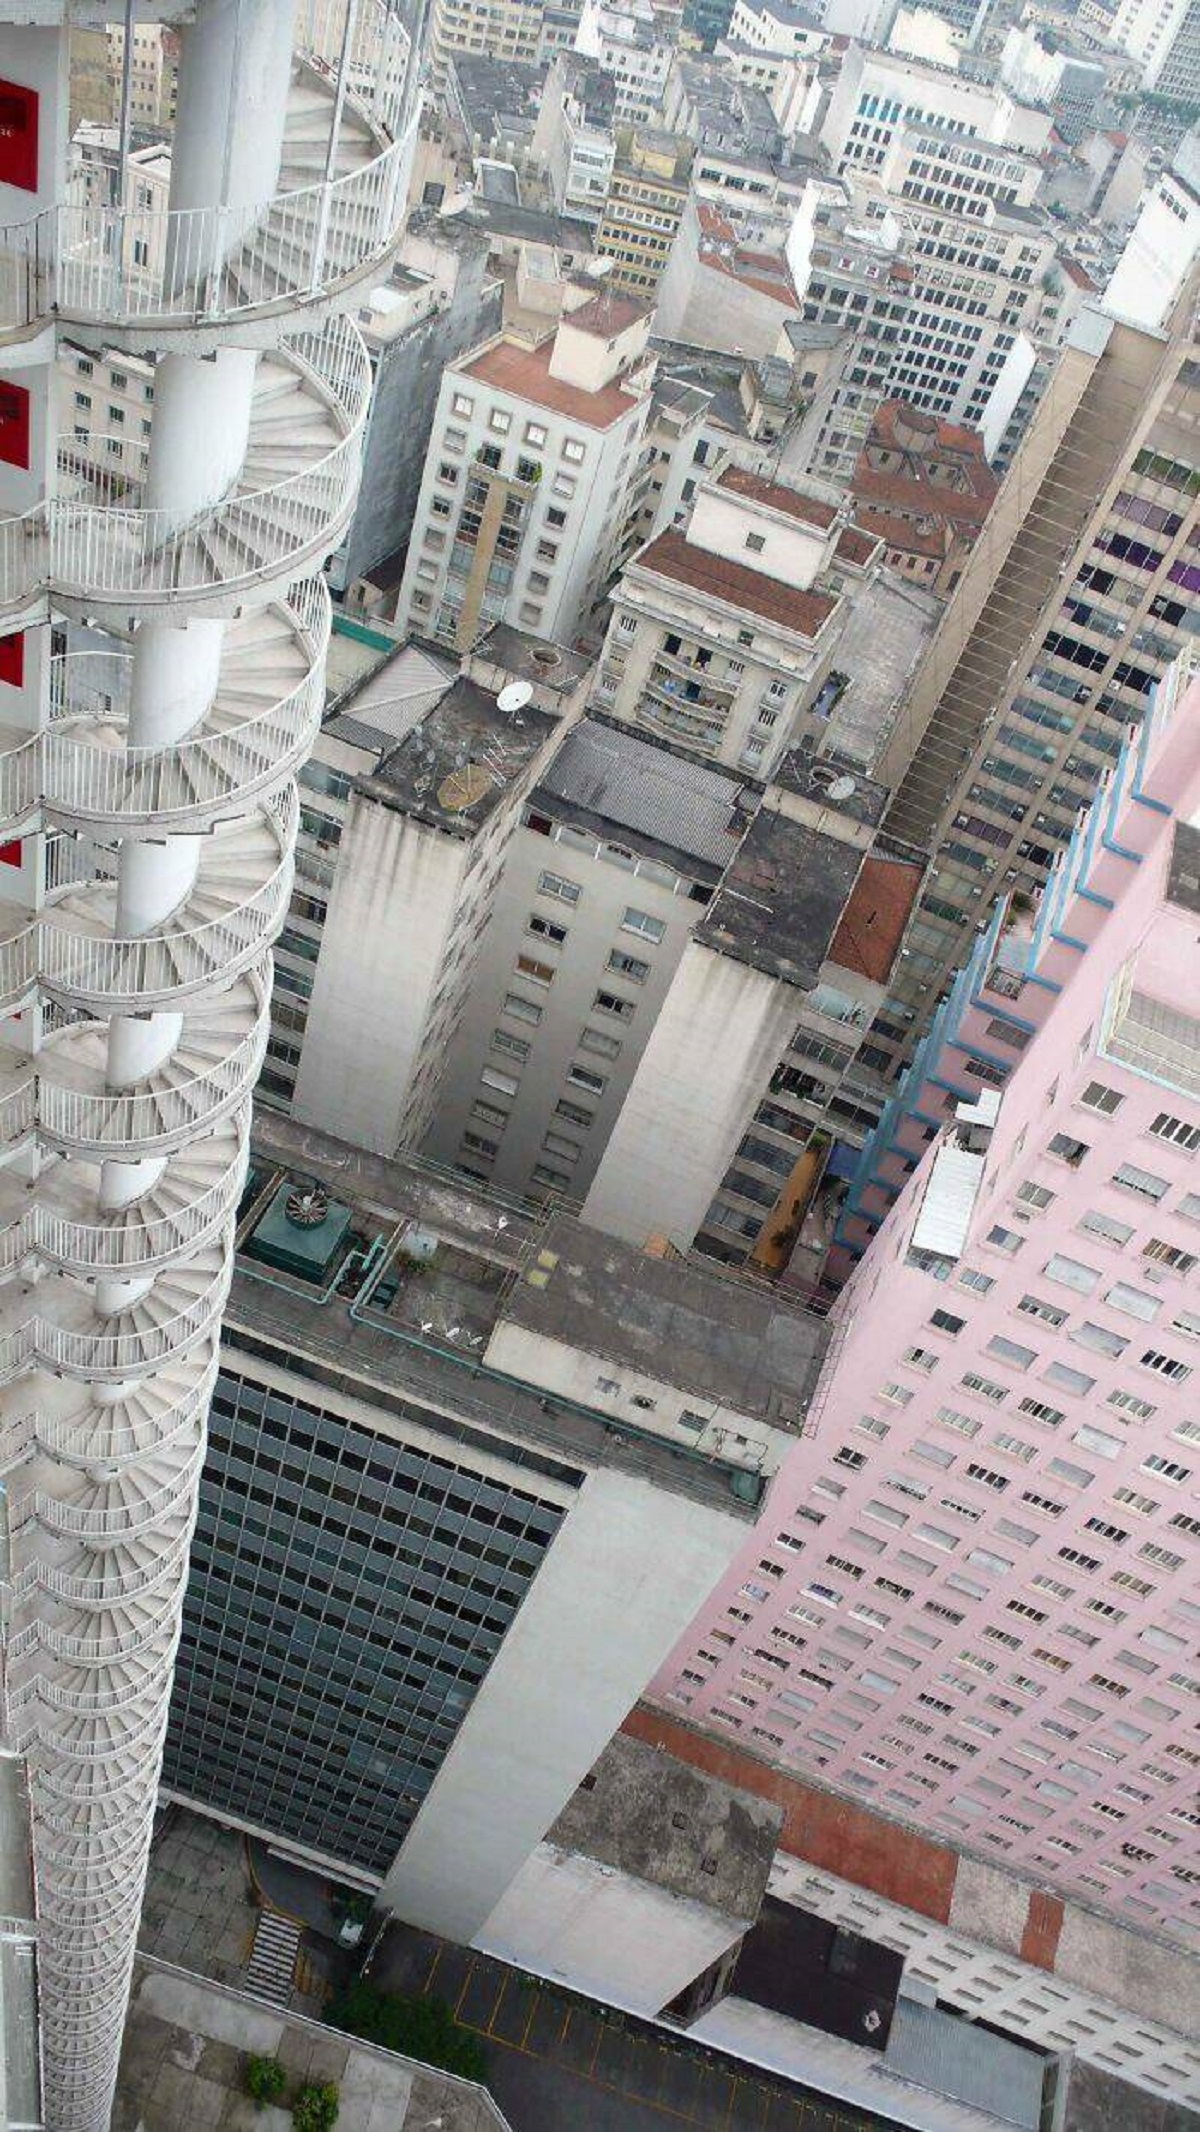 In Brazil, there's an apartment building with a 40-story spiral staircase attached to the outside meant as a fire escape.